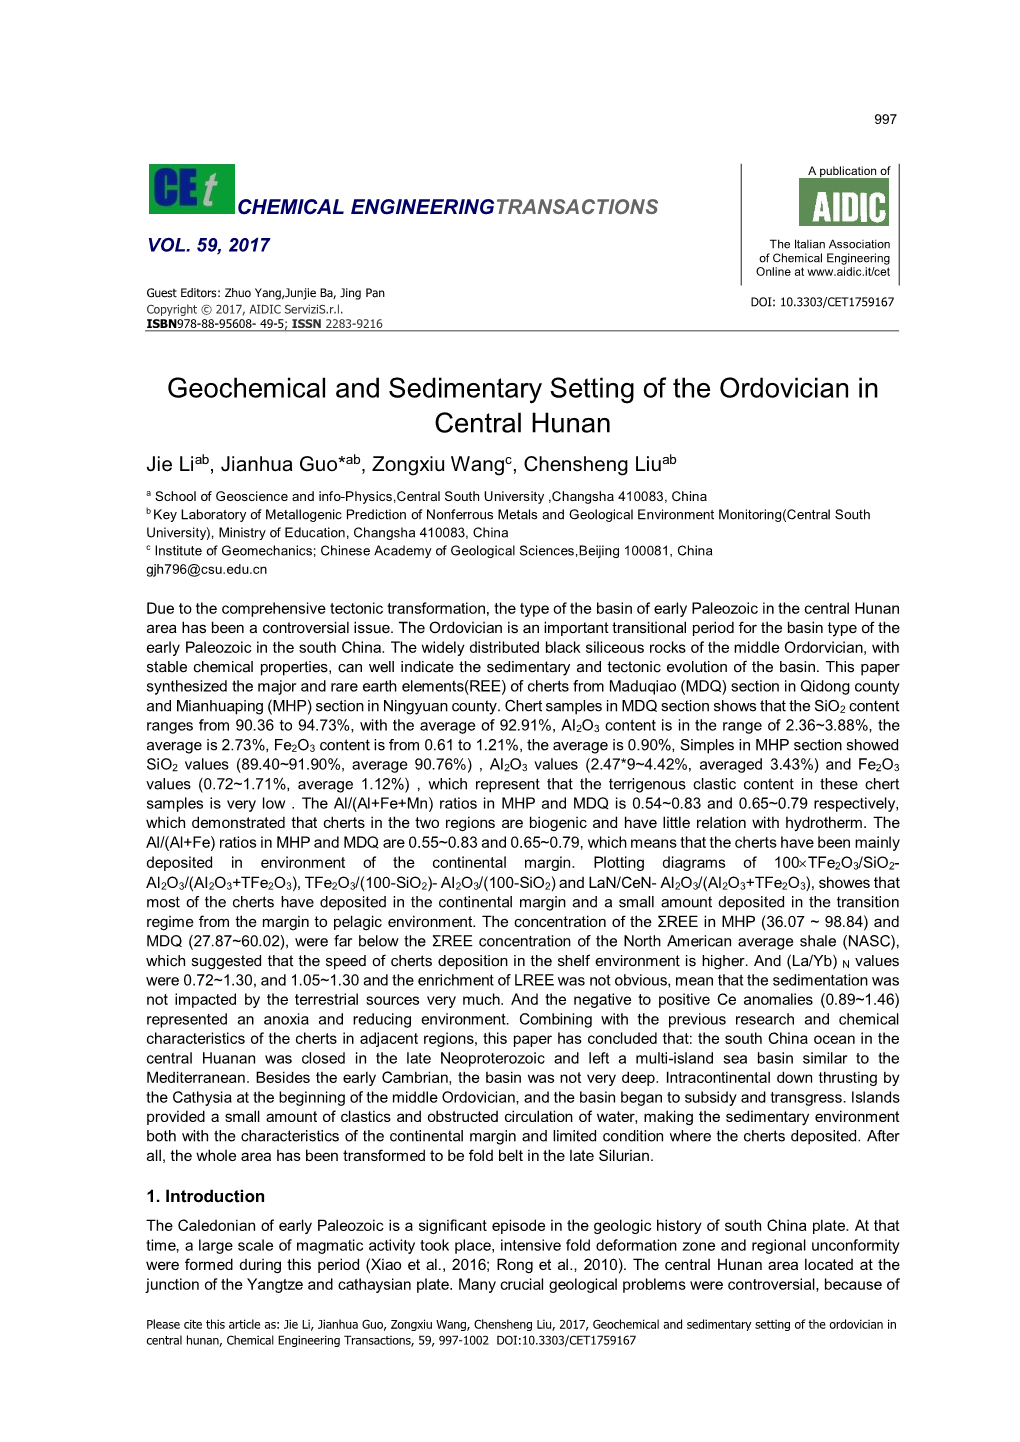 Geochemical and Sedimentary Setting of the Ordovician in Central Hunan, Chemical Engineering Transactions, 59, 997-1002 DOI:10.3303/CET1759167